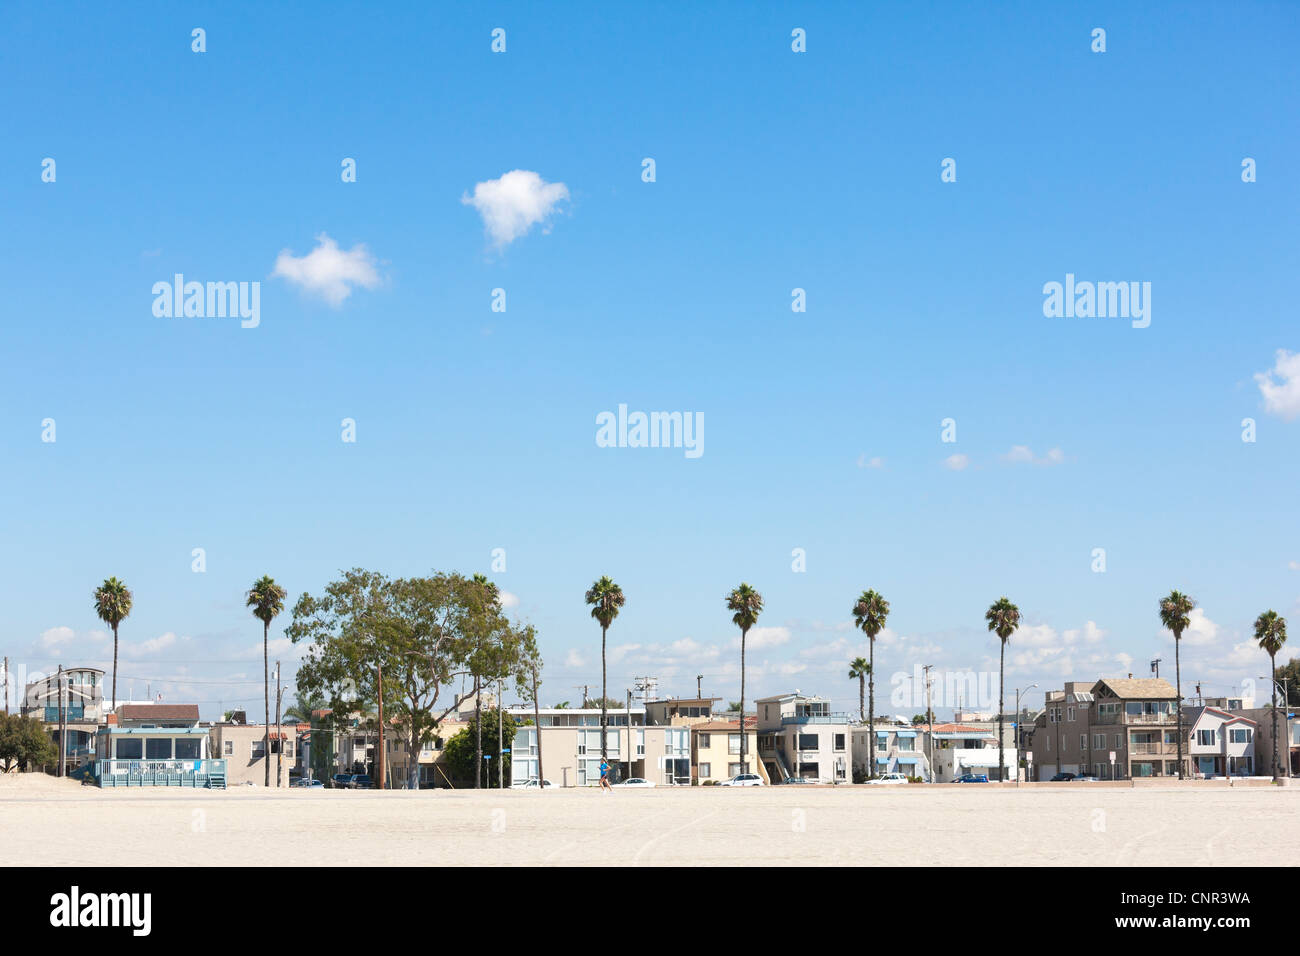 Long Beach California, East E Ocean Boulevard beach front homes. Looking out over the beachfront sand, with palm trees. Stock Photo